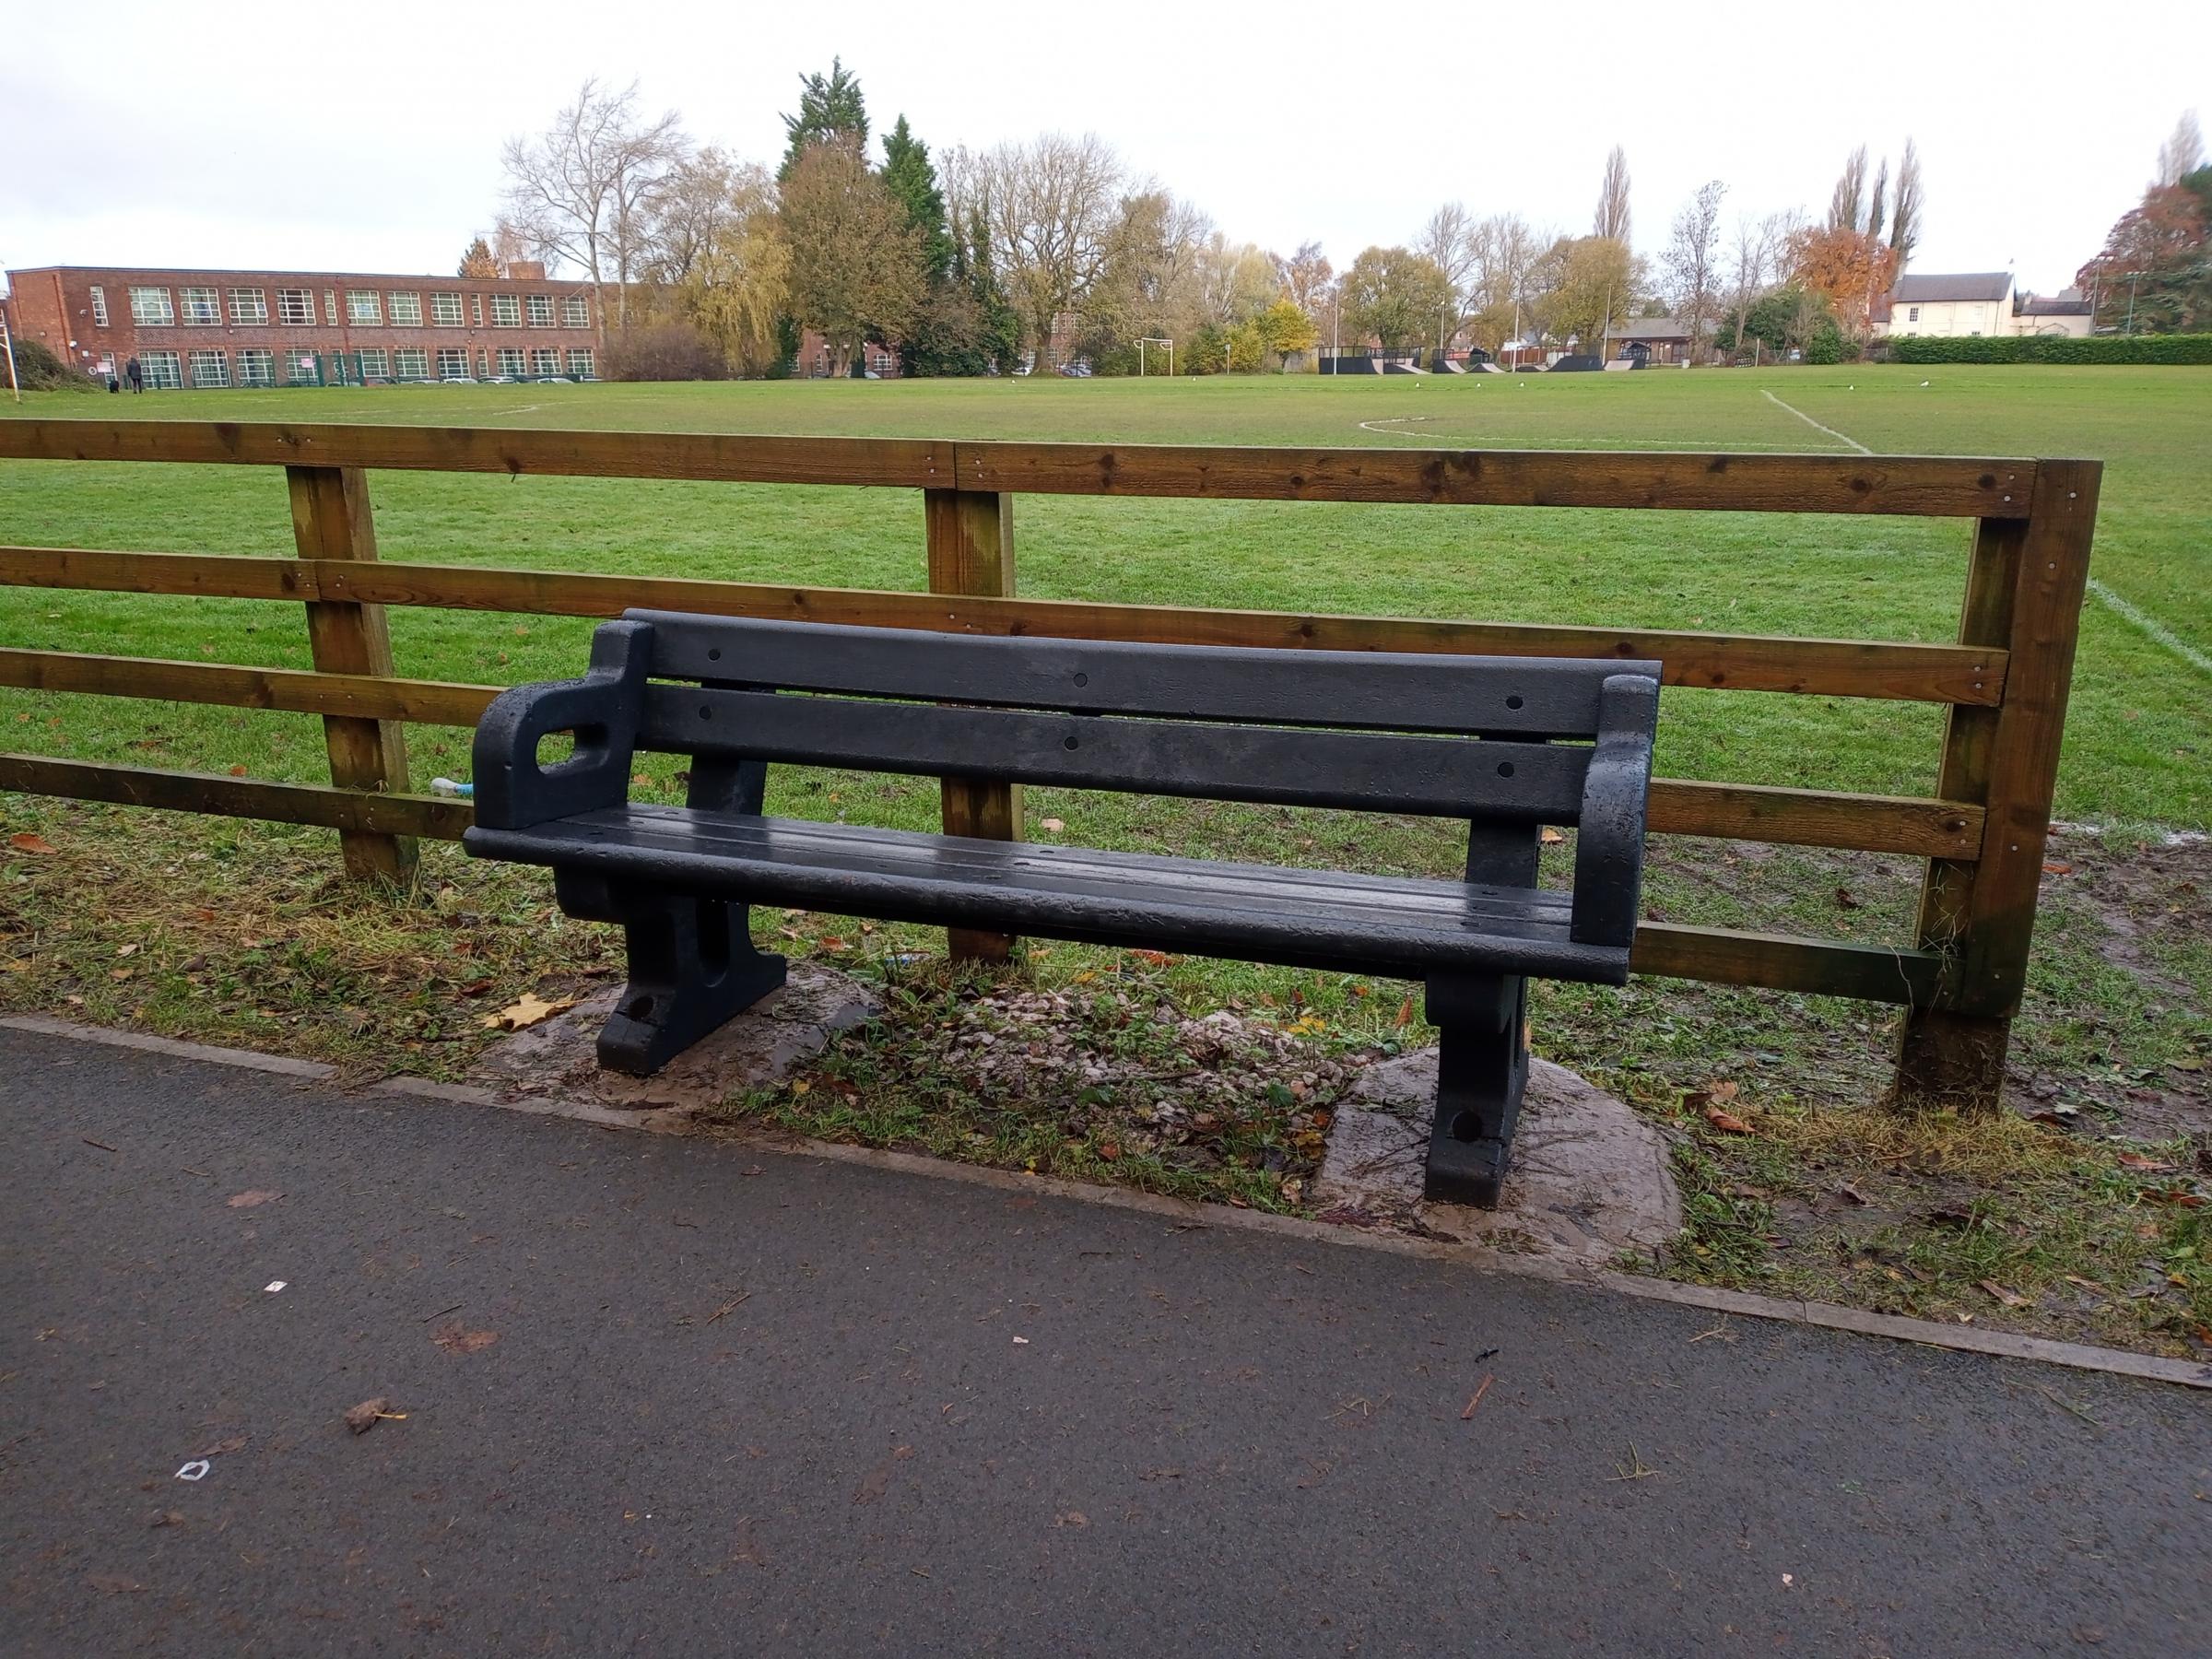 The newly installed bench in Buckley.